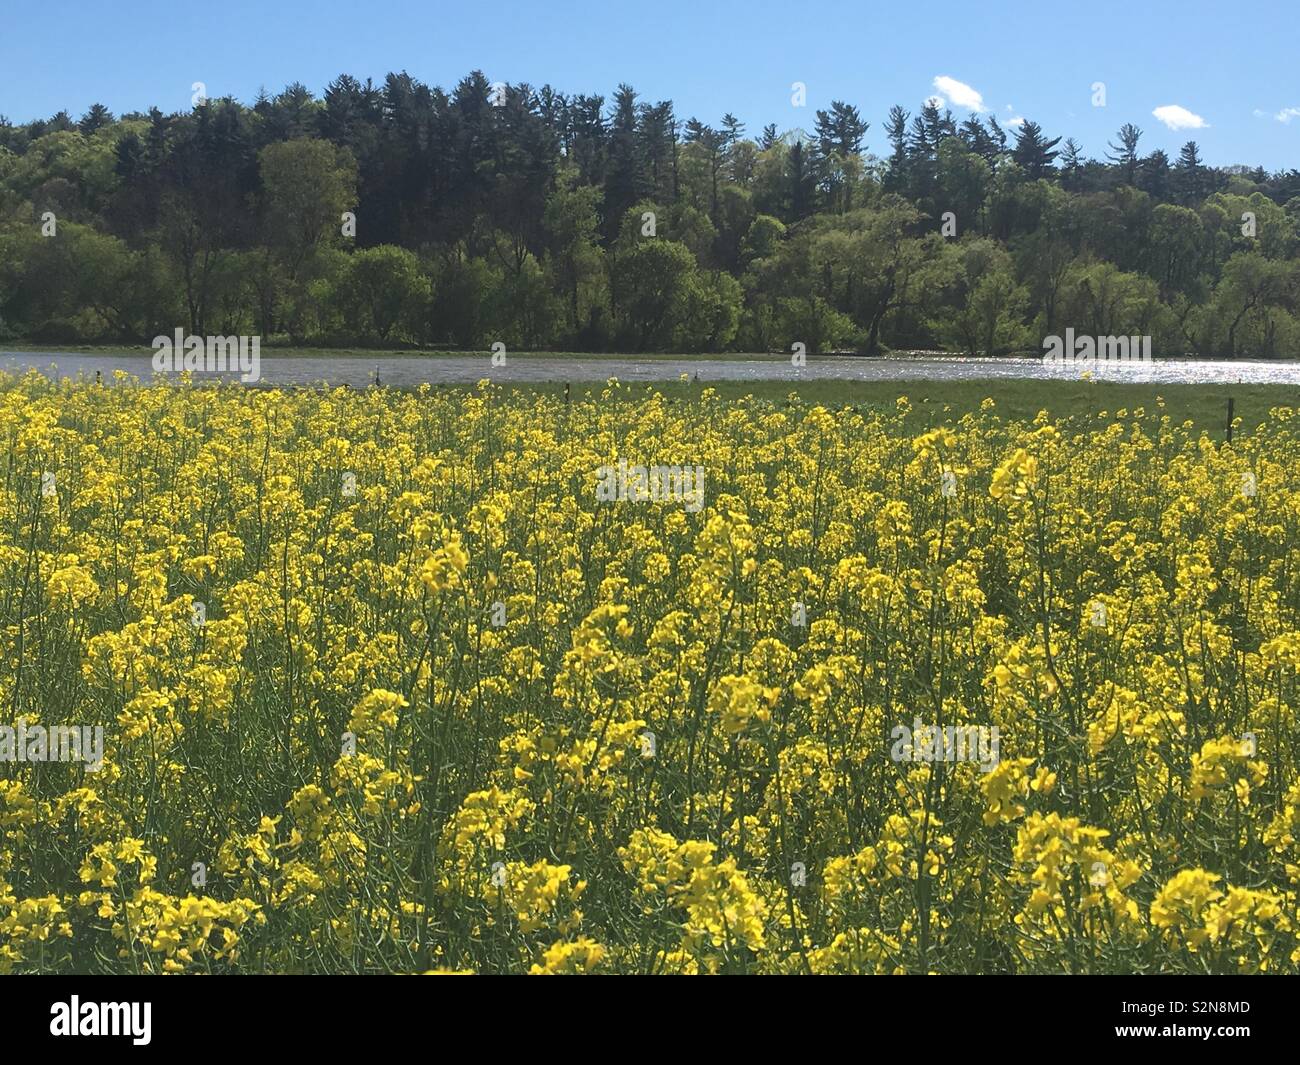 After The Flood- Canola Project at The Biltmore Estate- Overflow from the French Broad River in the background. Easter Weekend Stock Photo